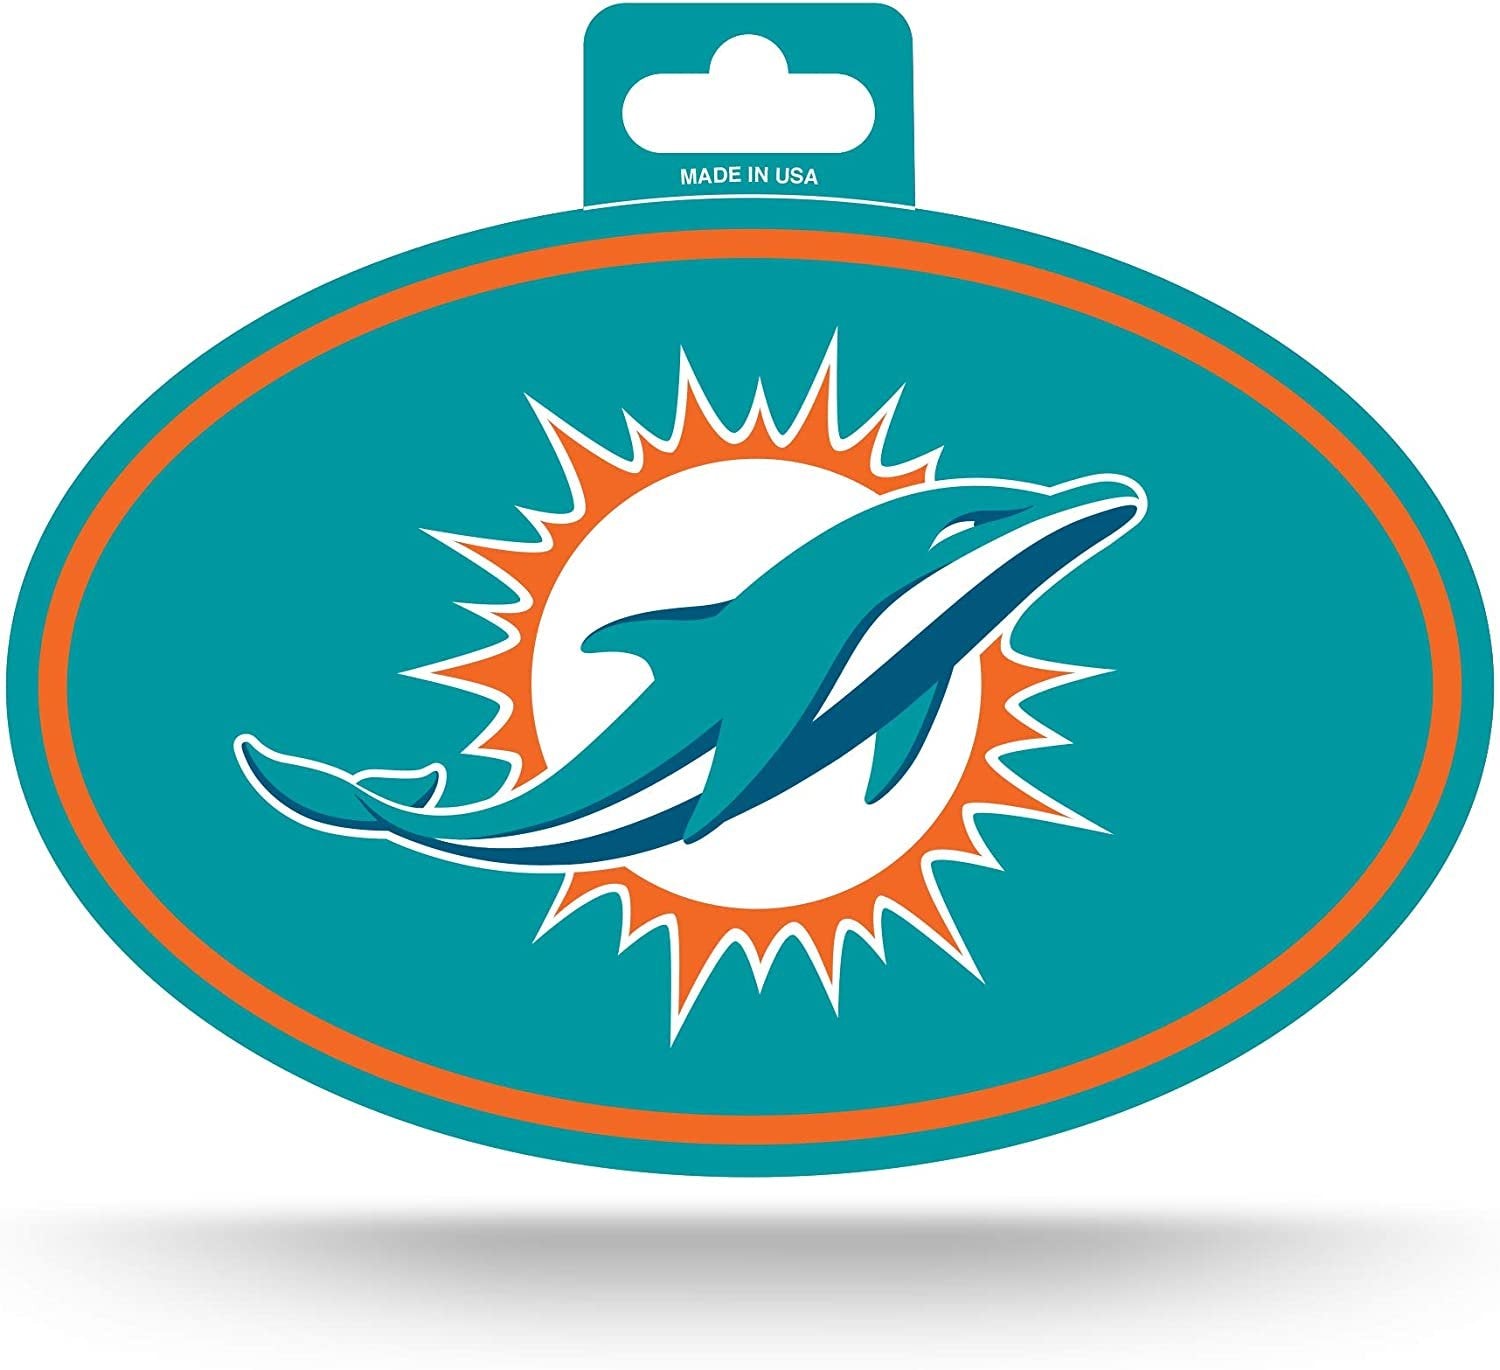 Miami Dolphins Color Team Logo Oval Sticker Decal, 3.75x5.75 Inch, Full Adhesive Backing